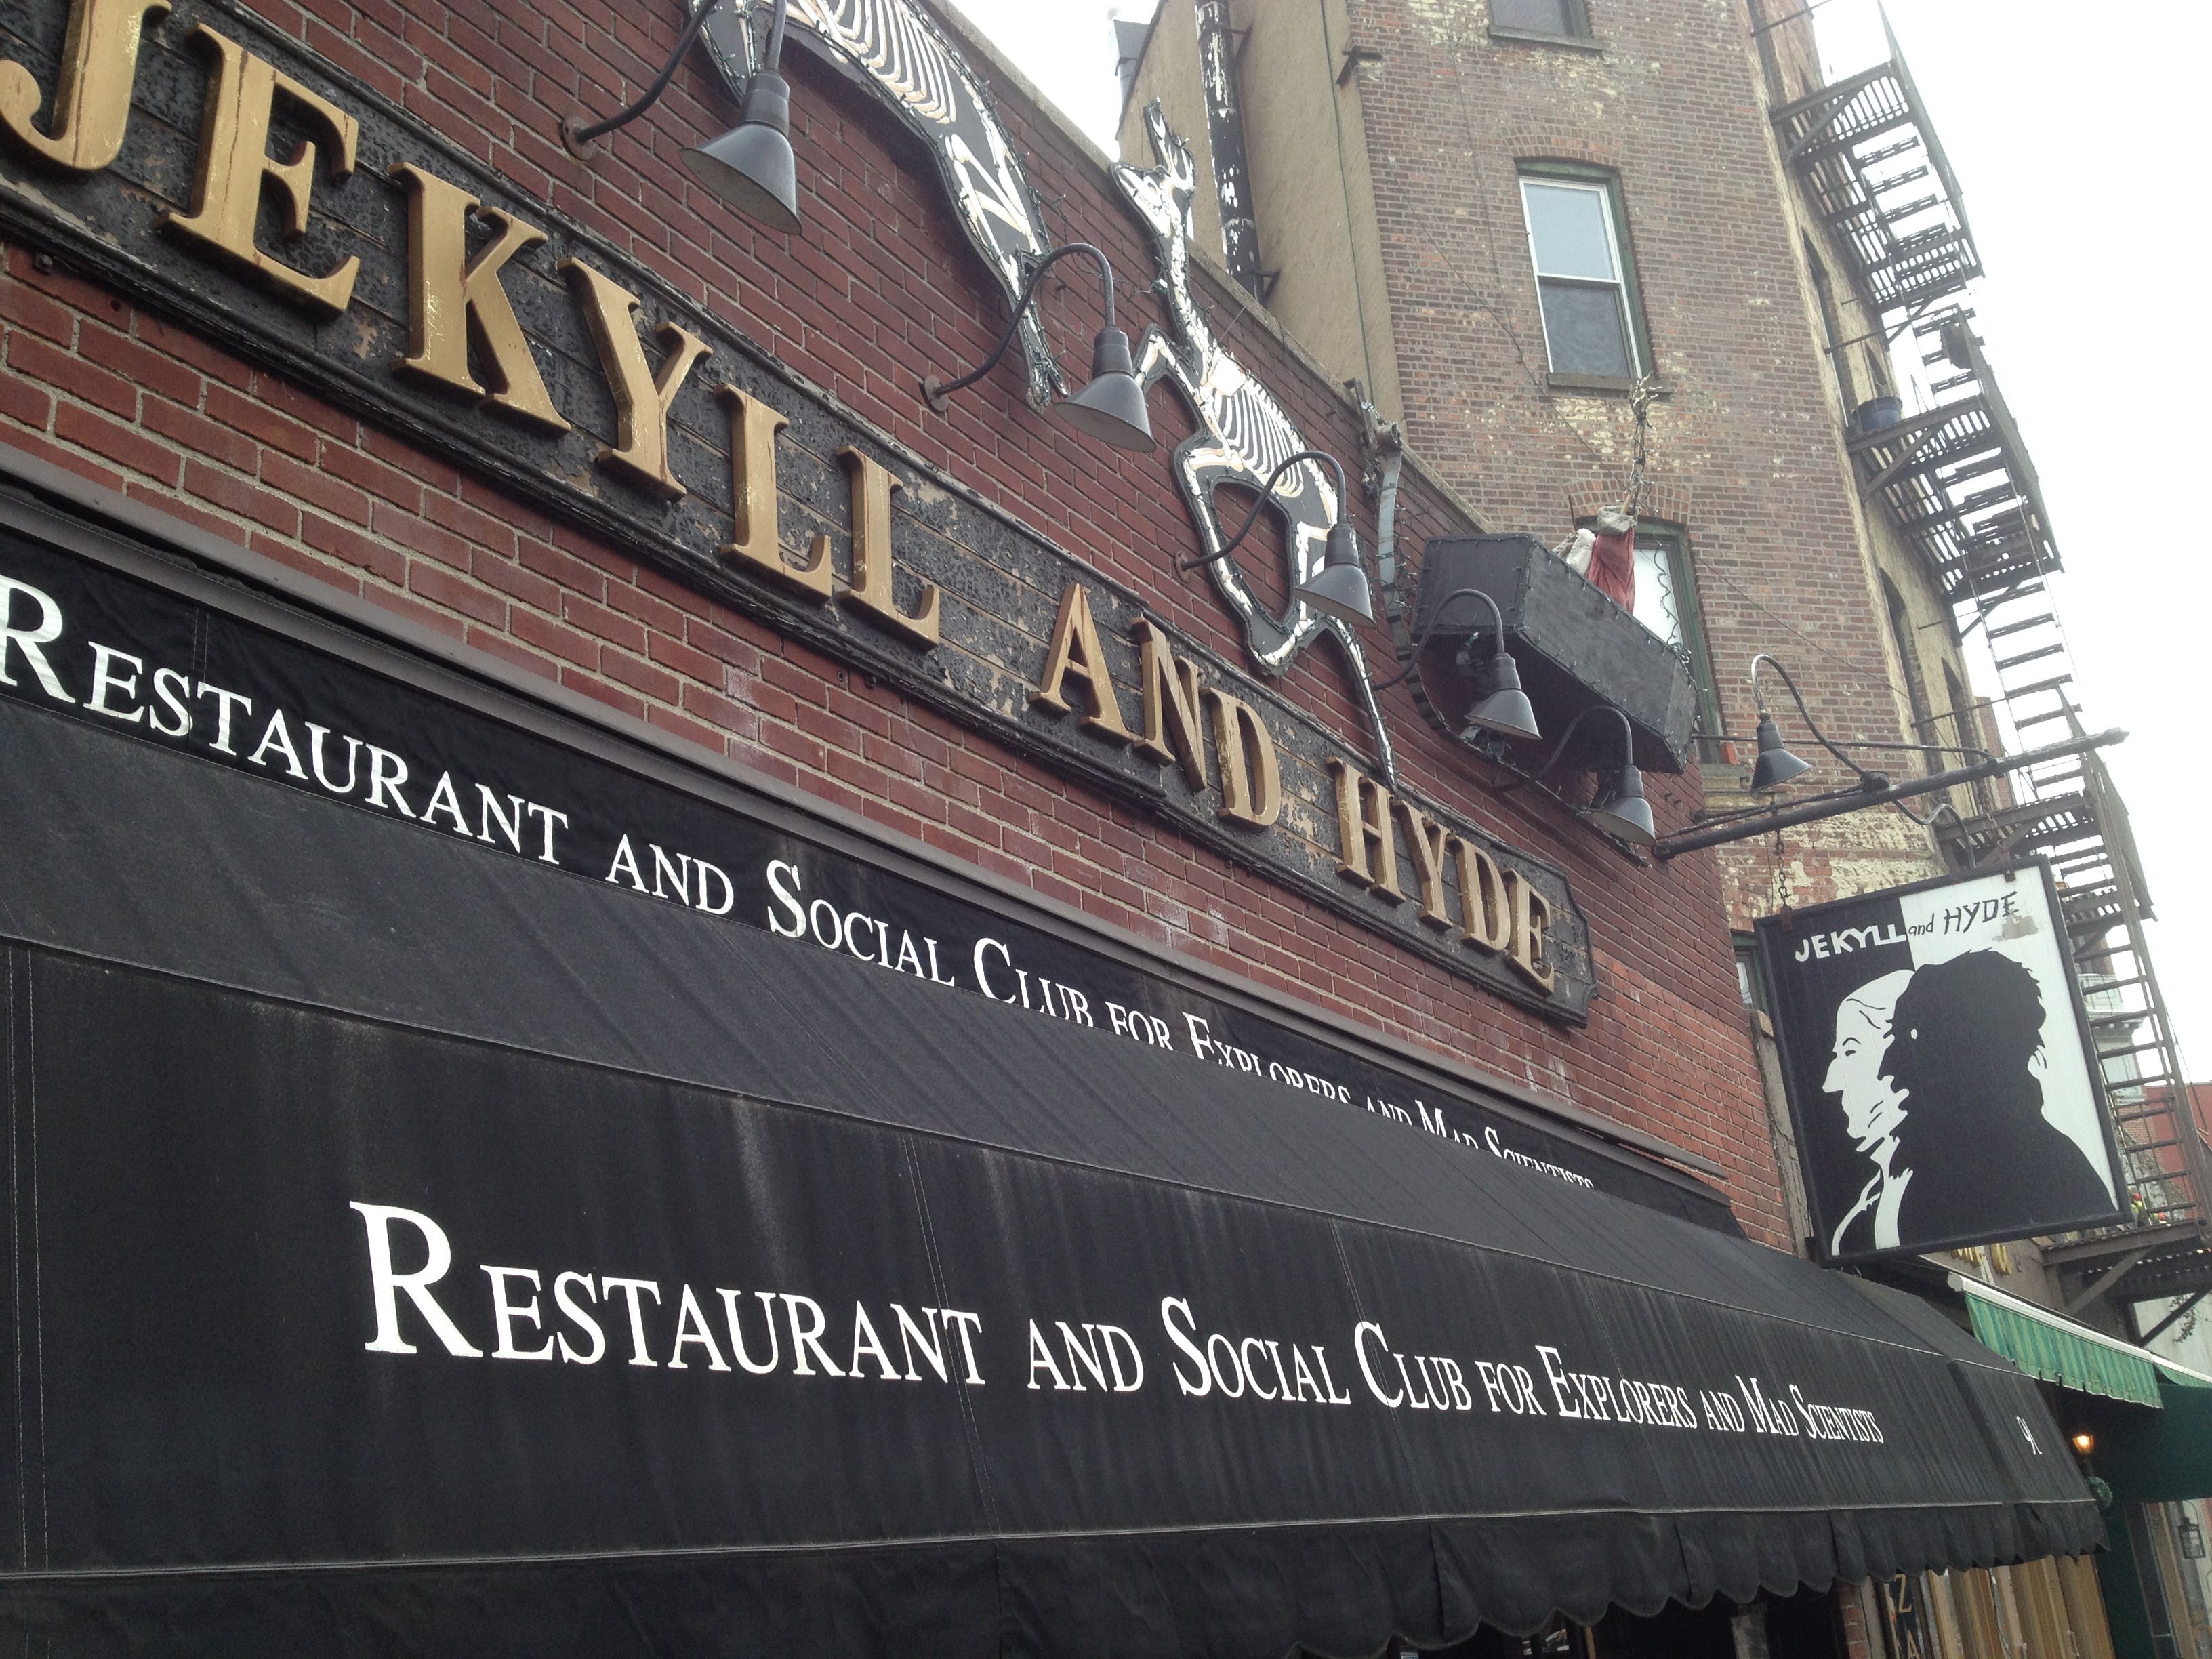 Jekyll and Hyde: restaurant and social club for explorers and mad scientists